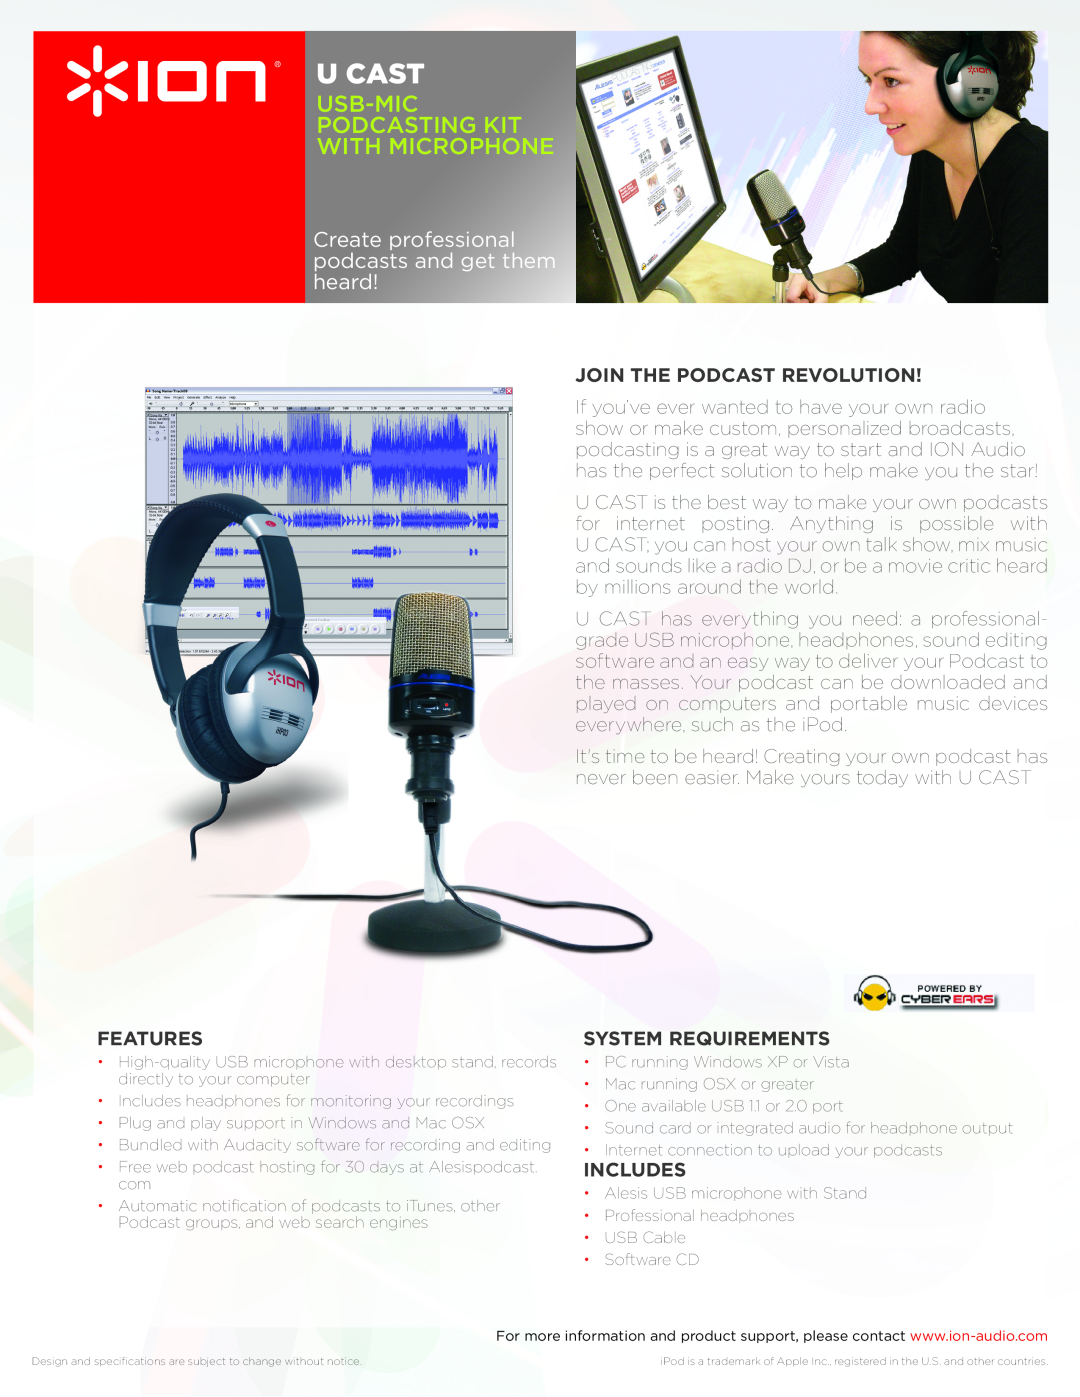 ION USB MIC Podcasting Kit With Microphone specifications U Cast, USB-Micpodcasting kit with microphone, Features 